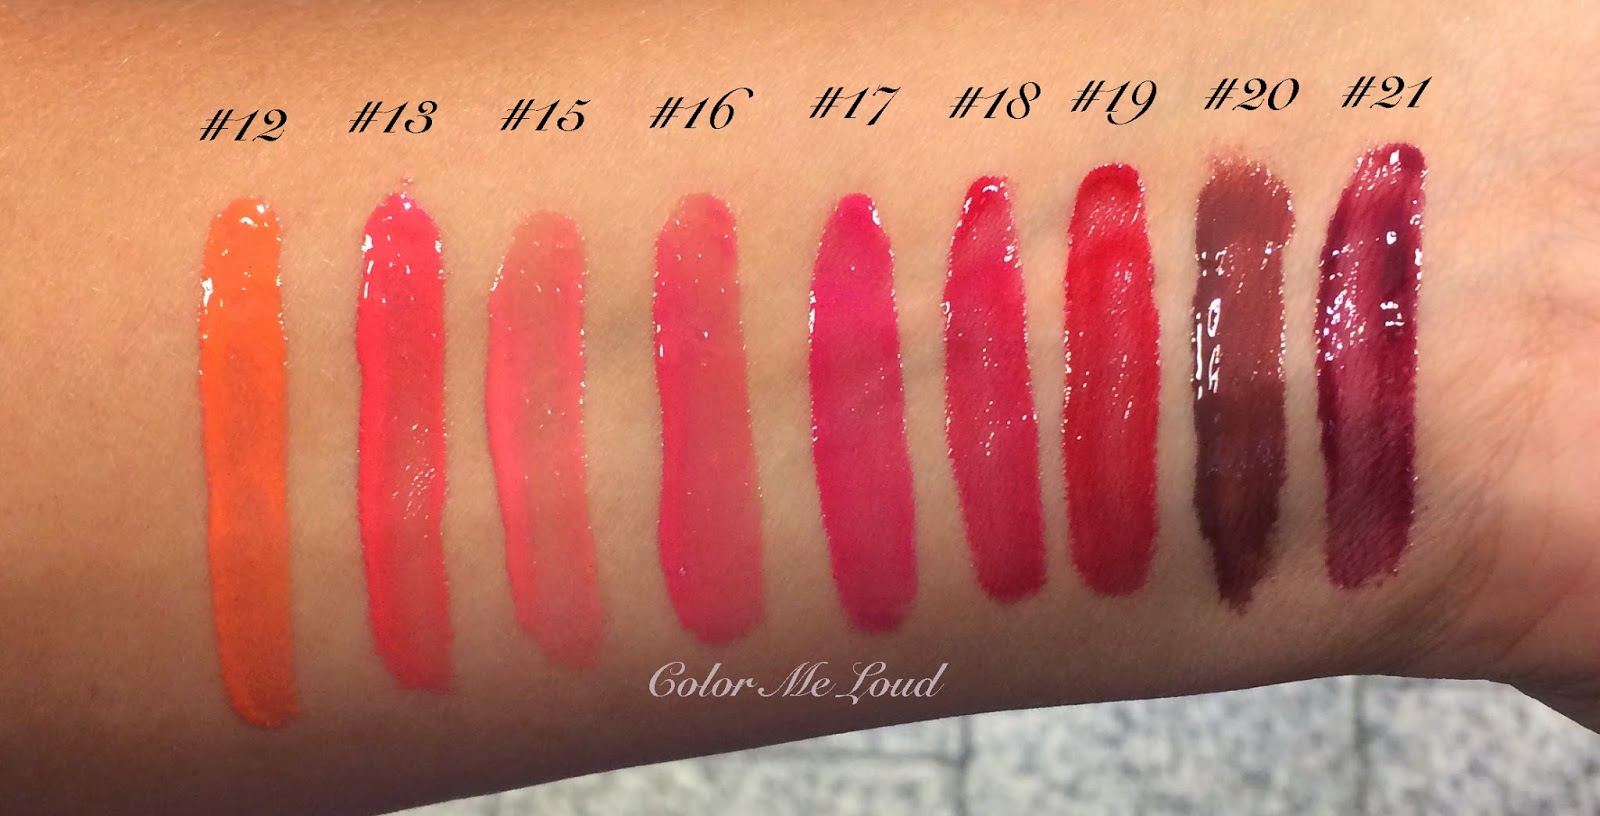 Chanel Rouge Allure Gloss One Click Collection Swatches, All